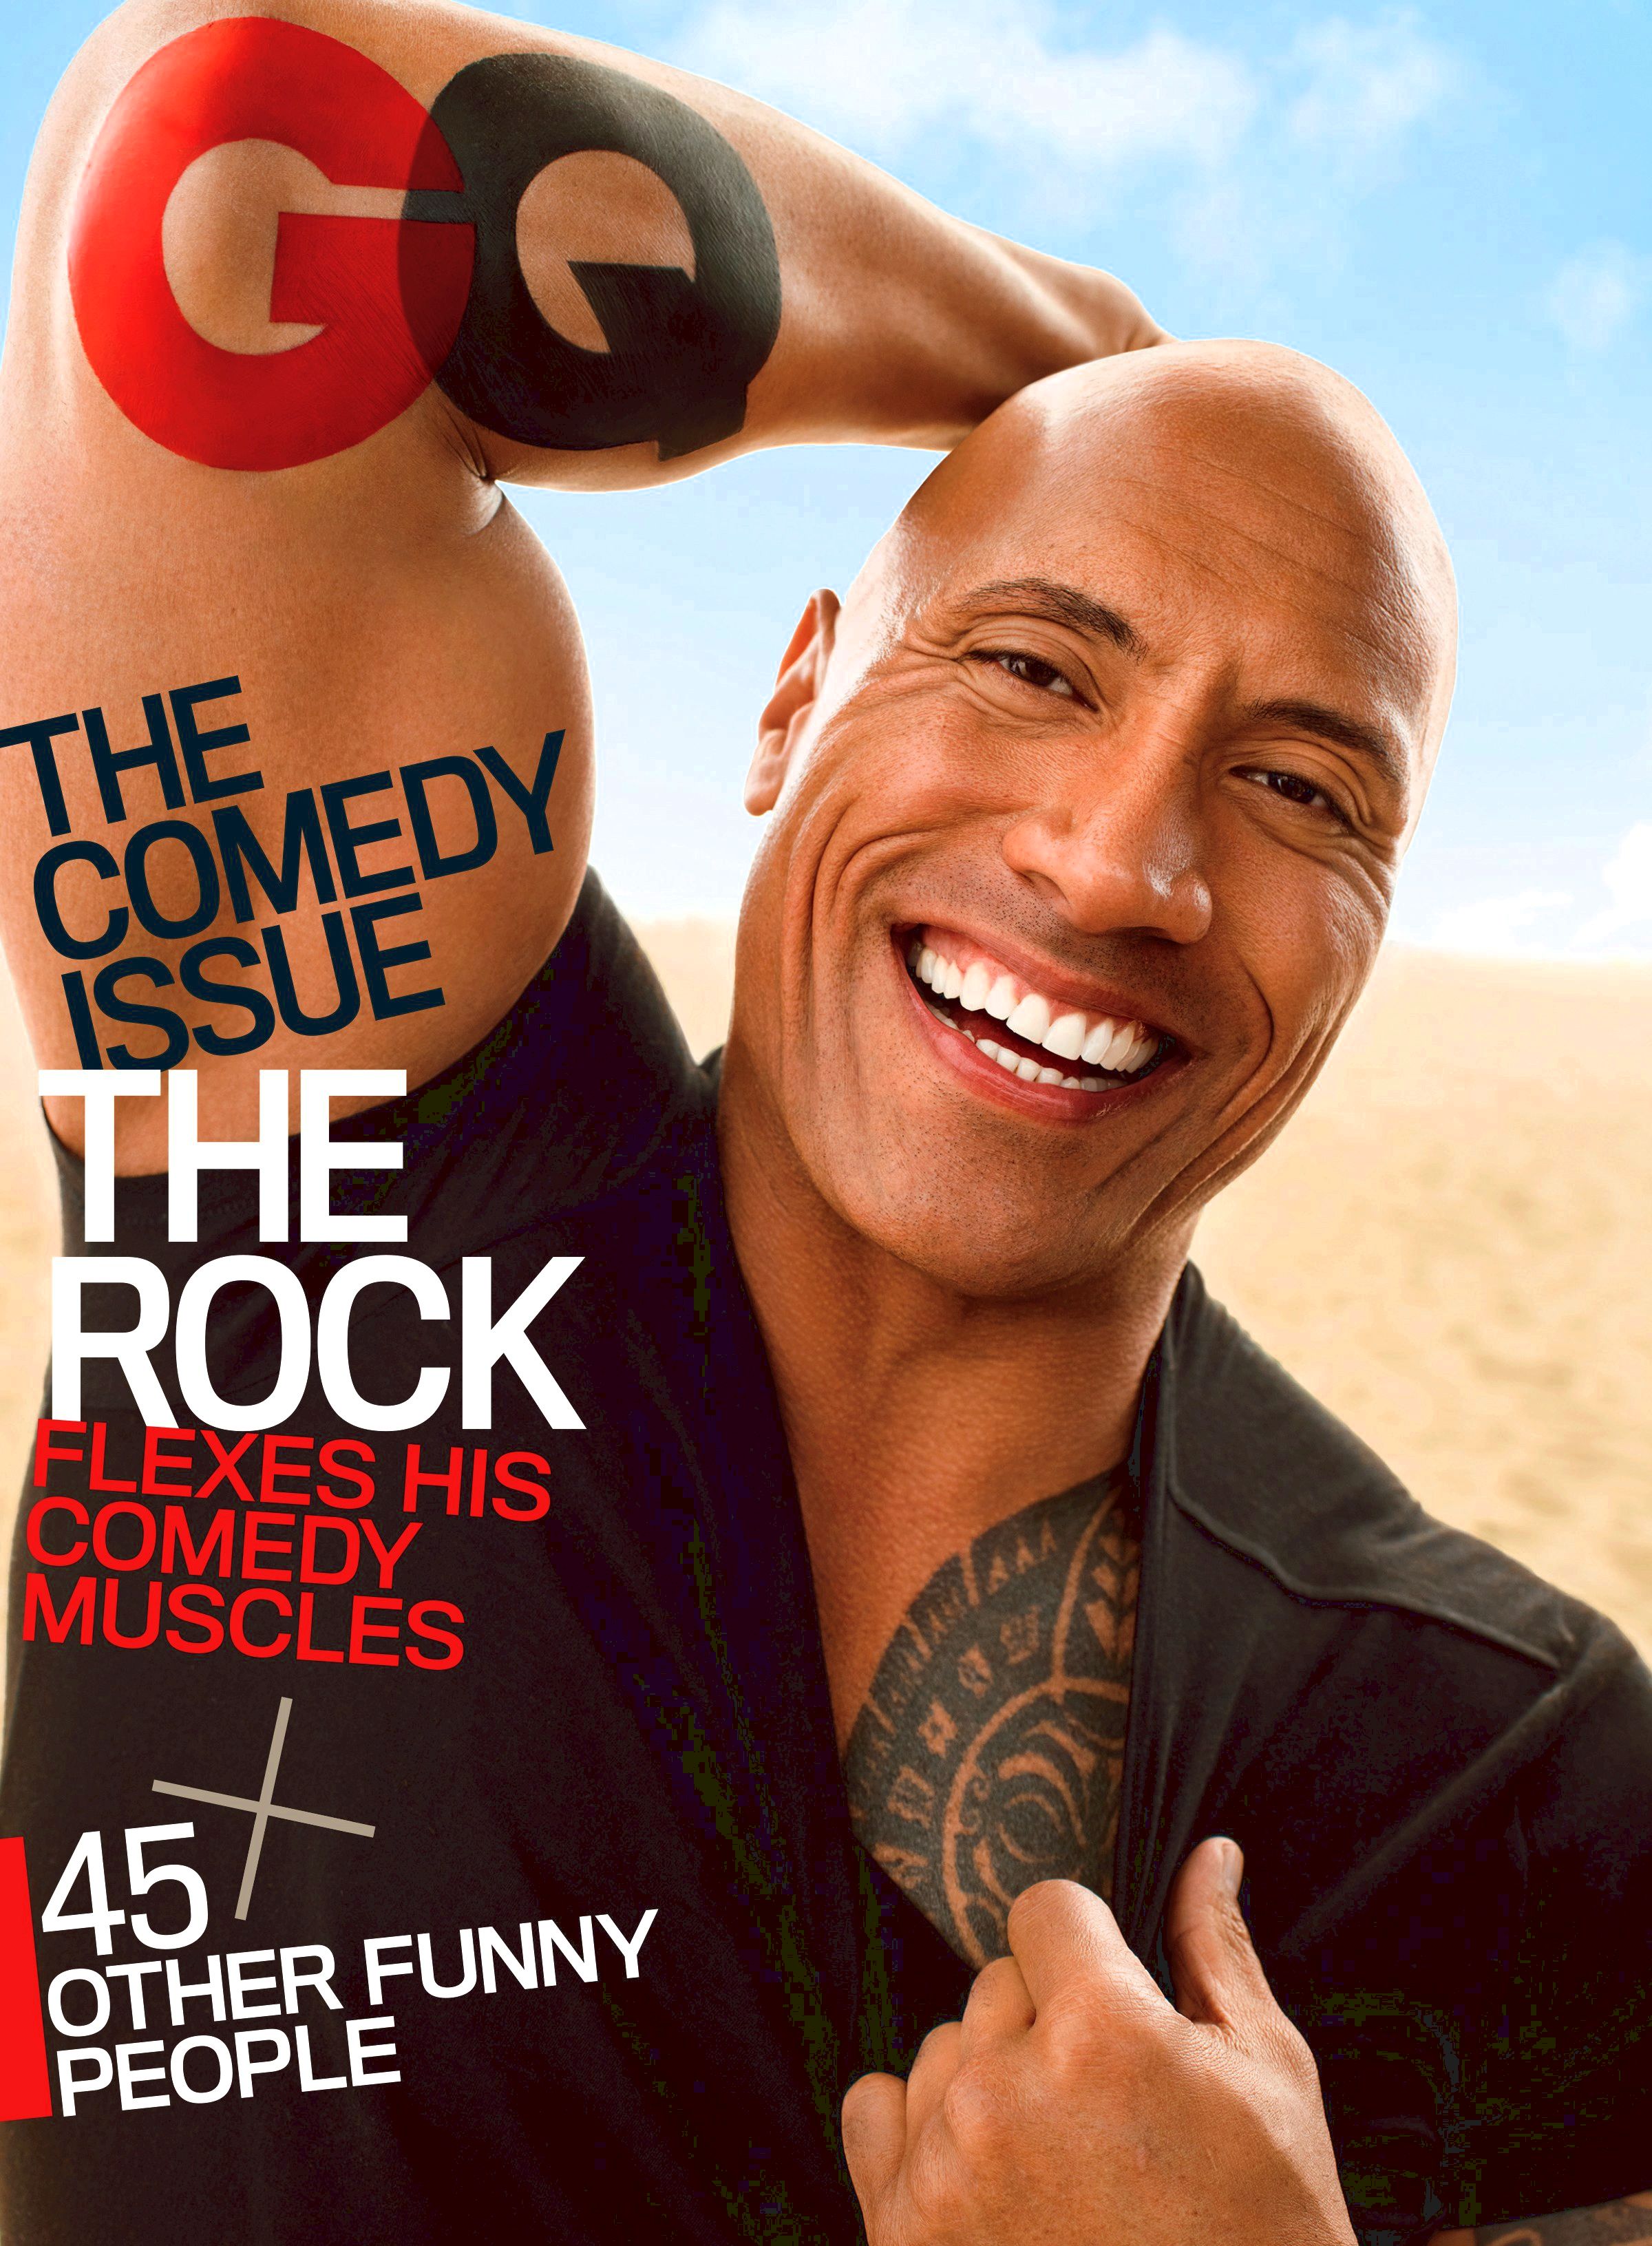 The 16 best hashtags in the rock's instagram Yes, The Rock comes with